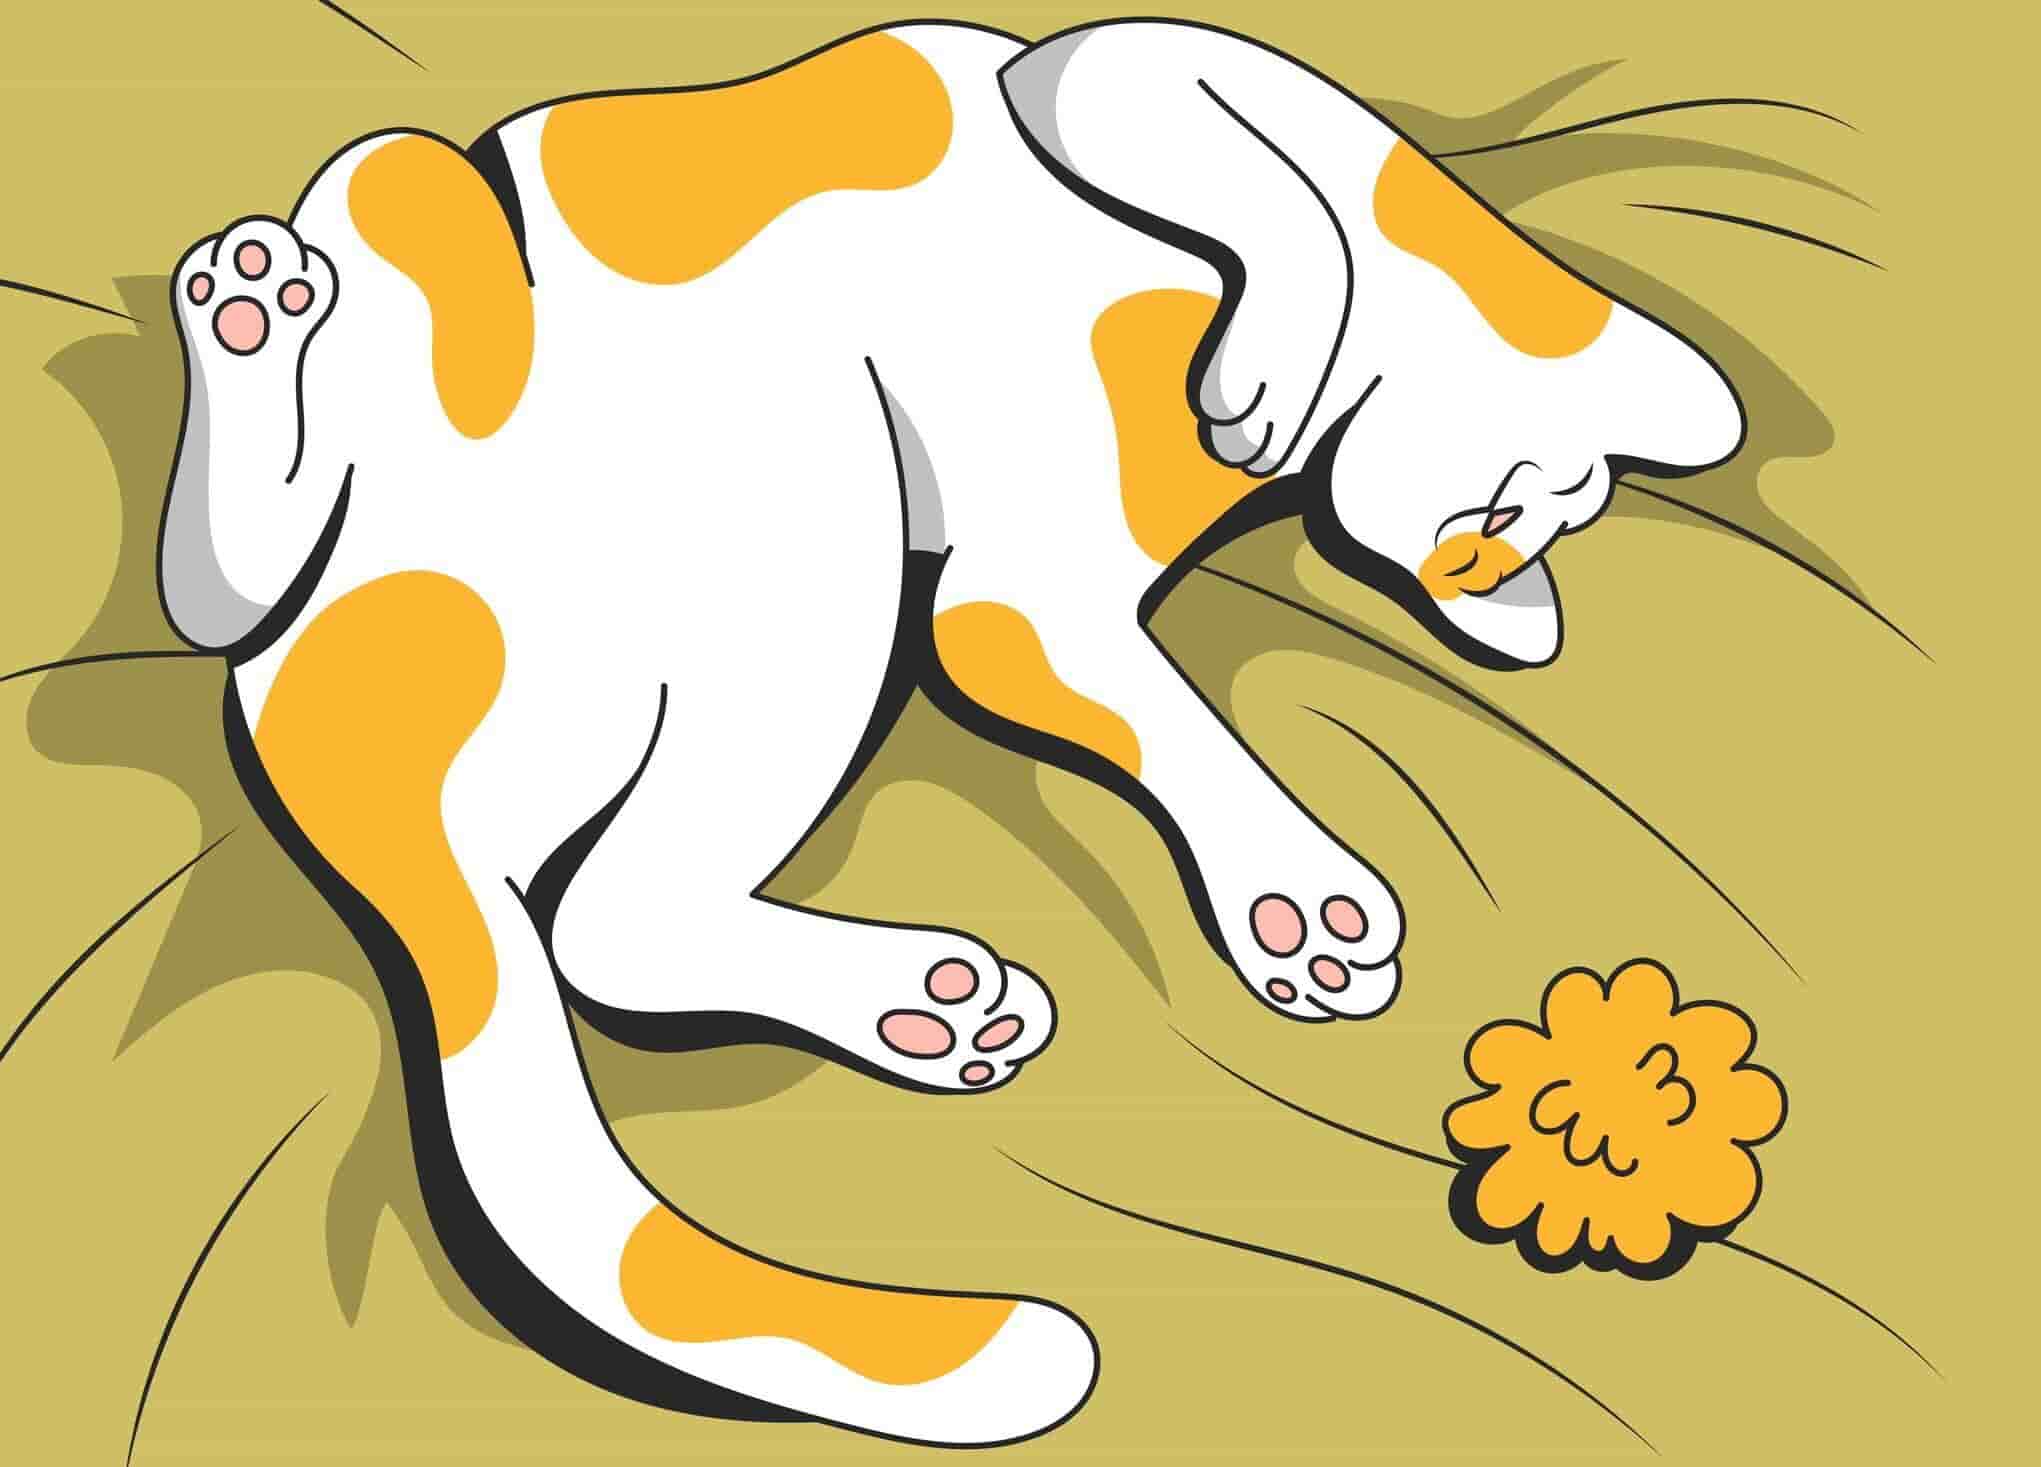 Why Do Cats Twitch In Their Sleep?